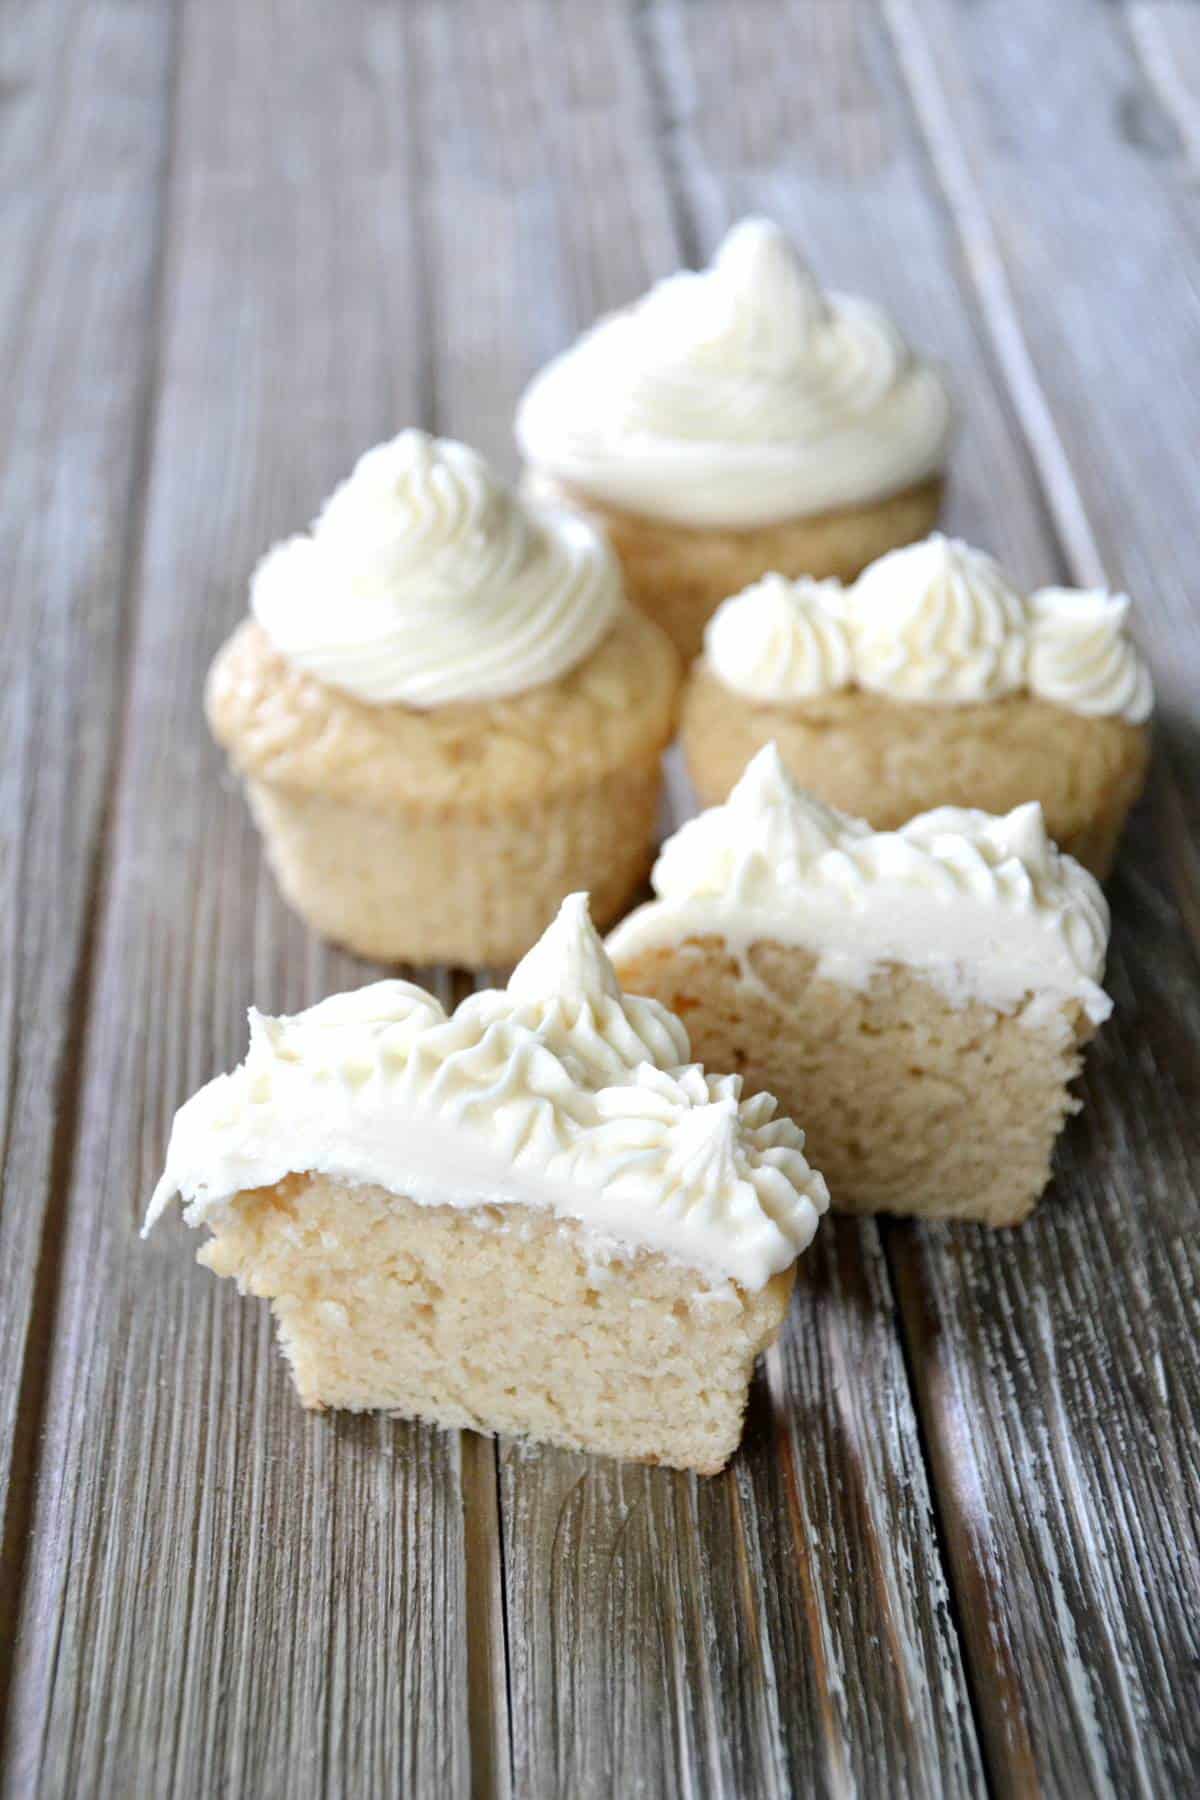 cupcakes showcasing buttercream frosting.